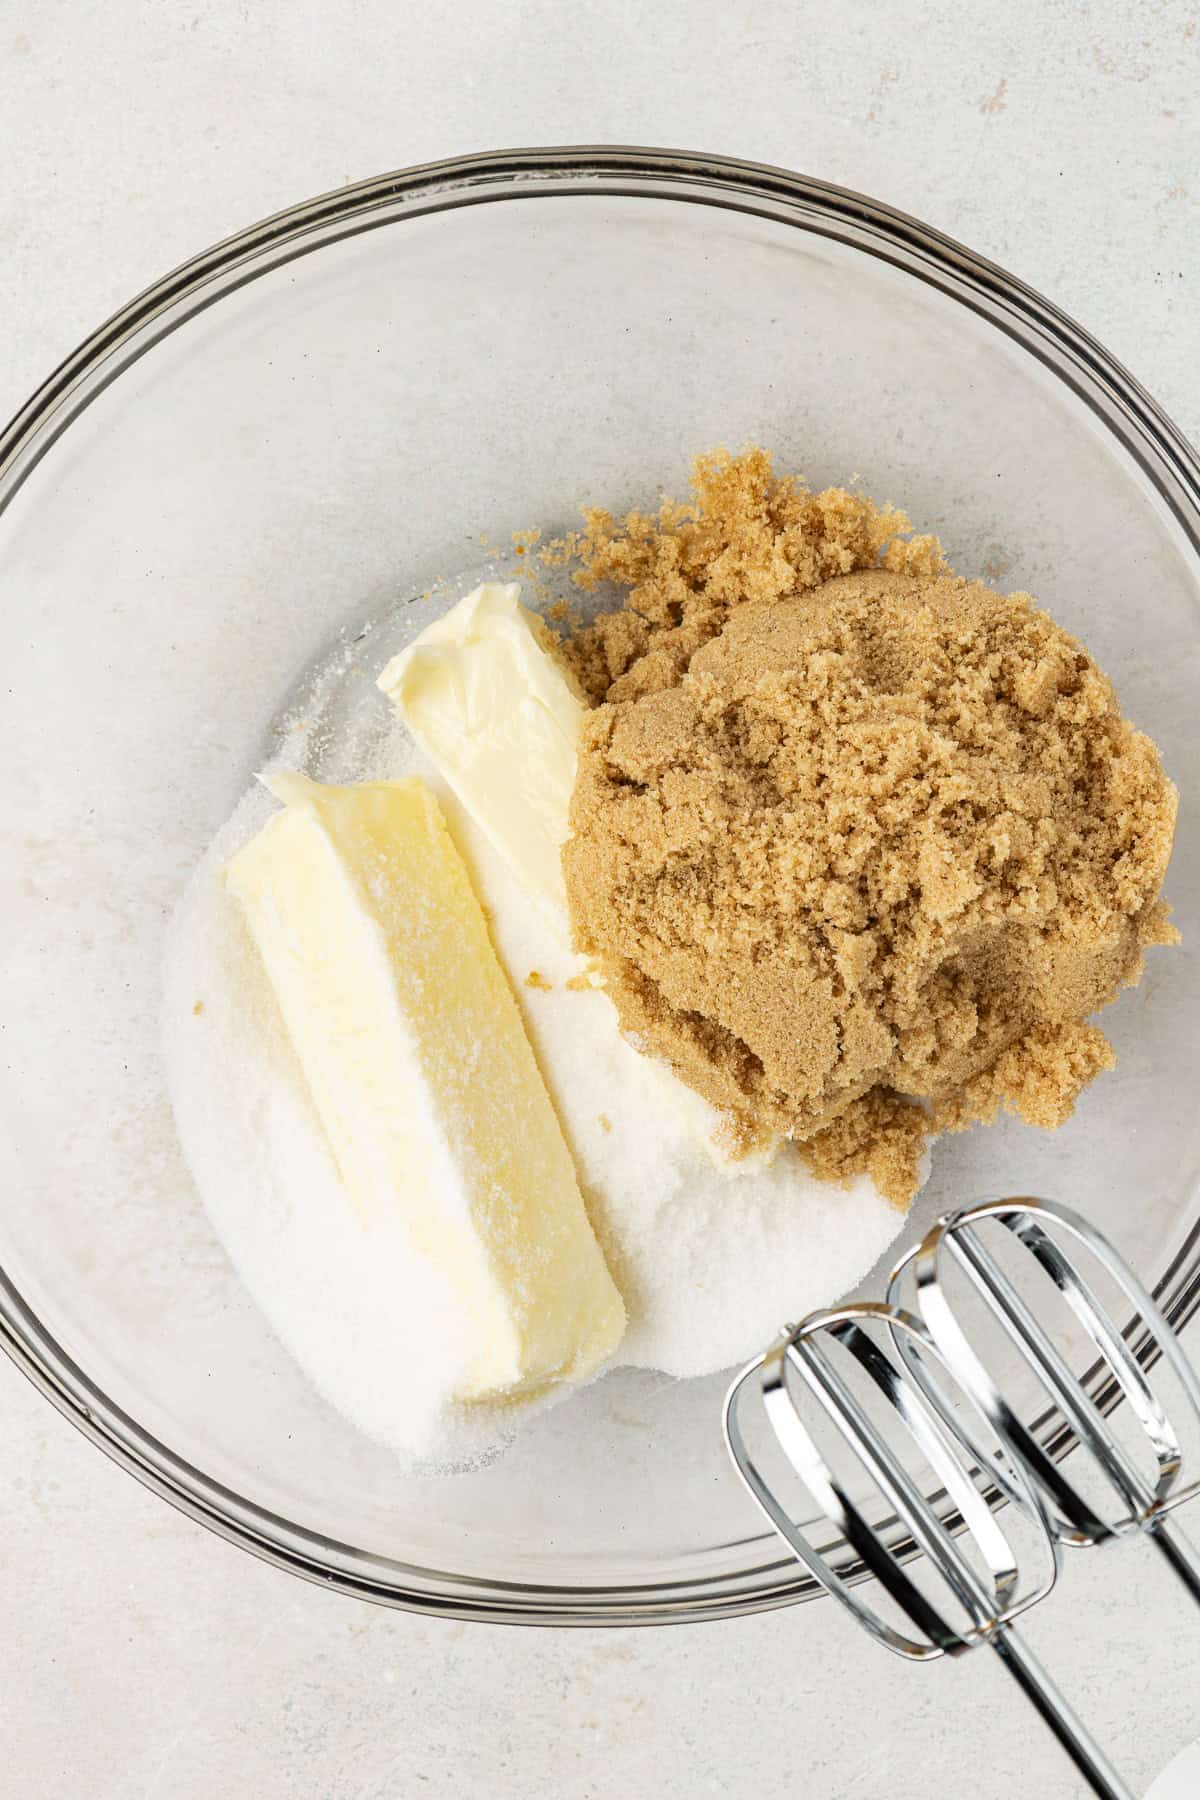 butter, granulated sugar and brown sugar in a clear glass mixing bowl with an electric mixer leaning on the side of the bowl